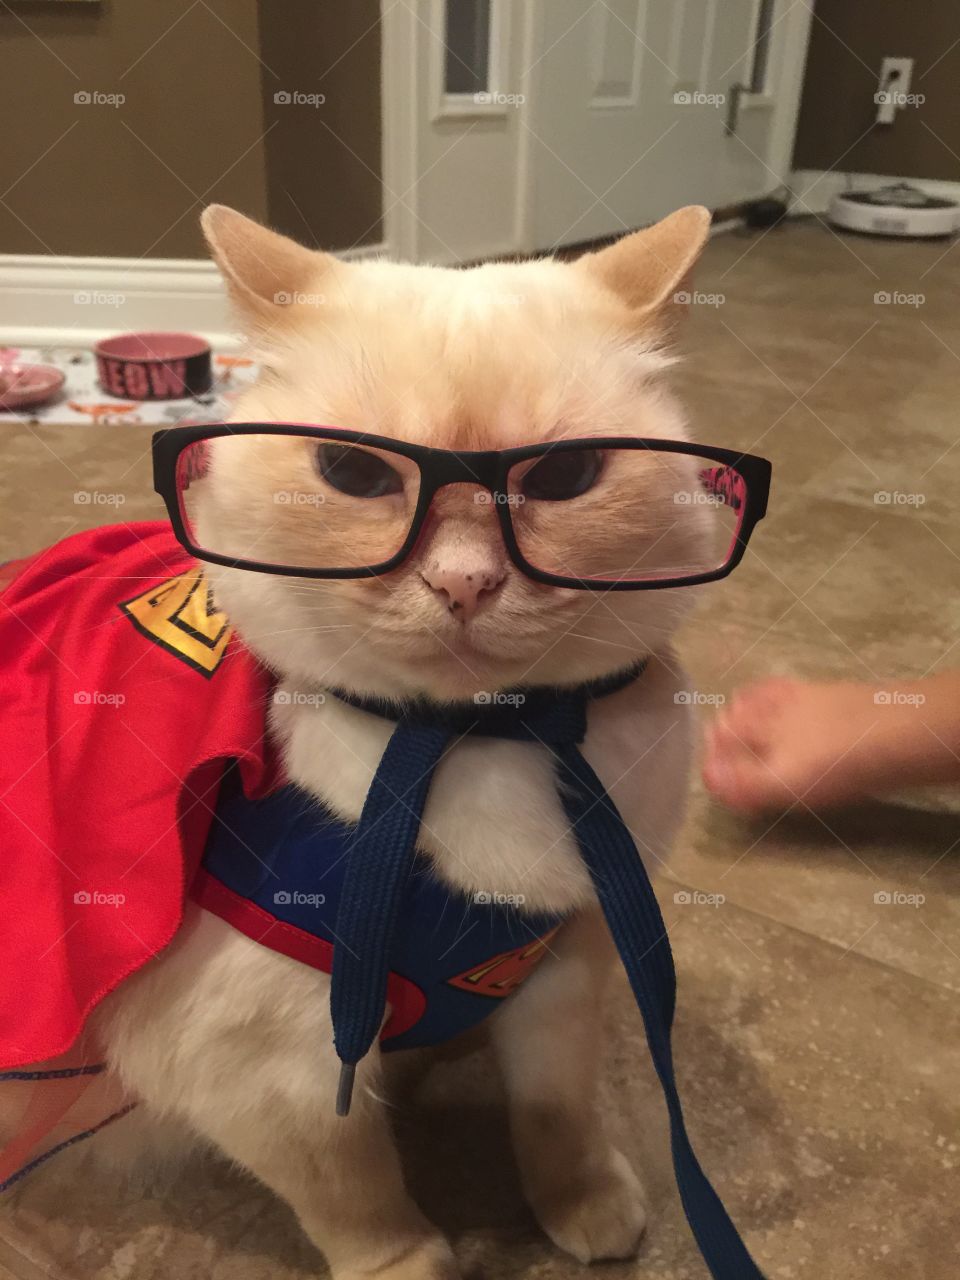 From the planet of Kitton, the Kitty of steel known as SuperKitty! Possessing phenomenal strength and quickness, Superkitty fights for justice and peace, disguised as a cool cat, known as Kitty Kent!